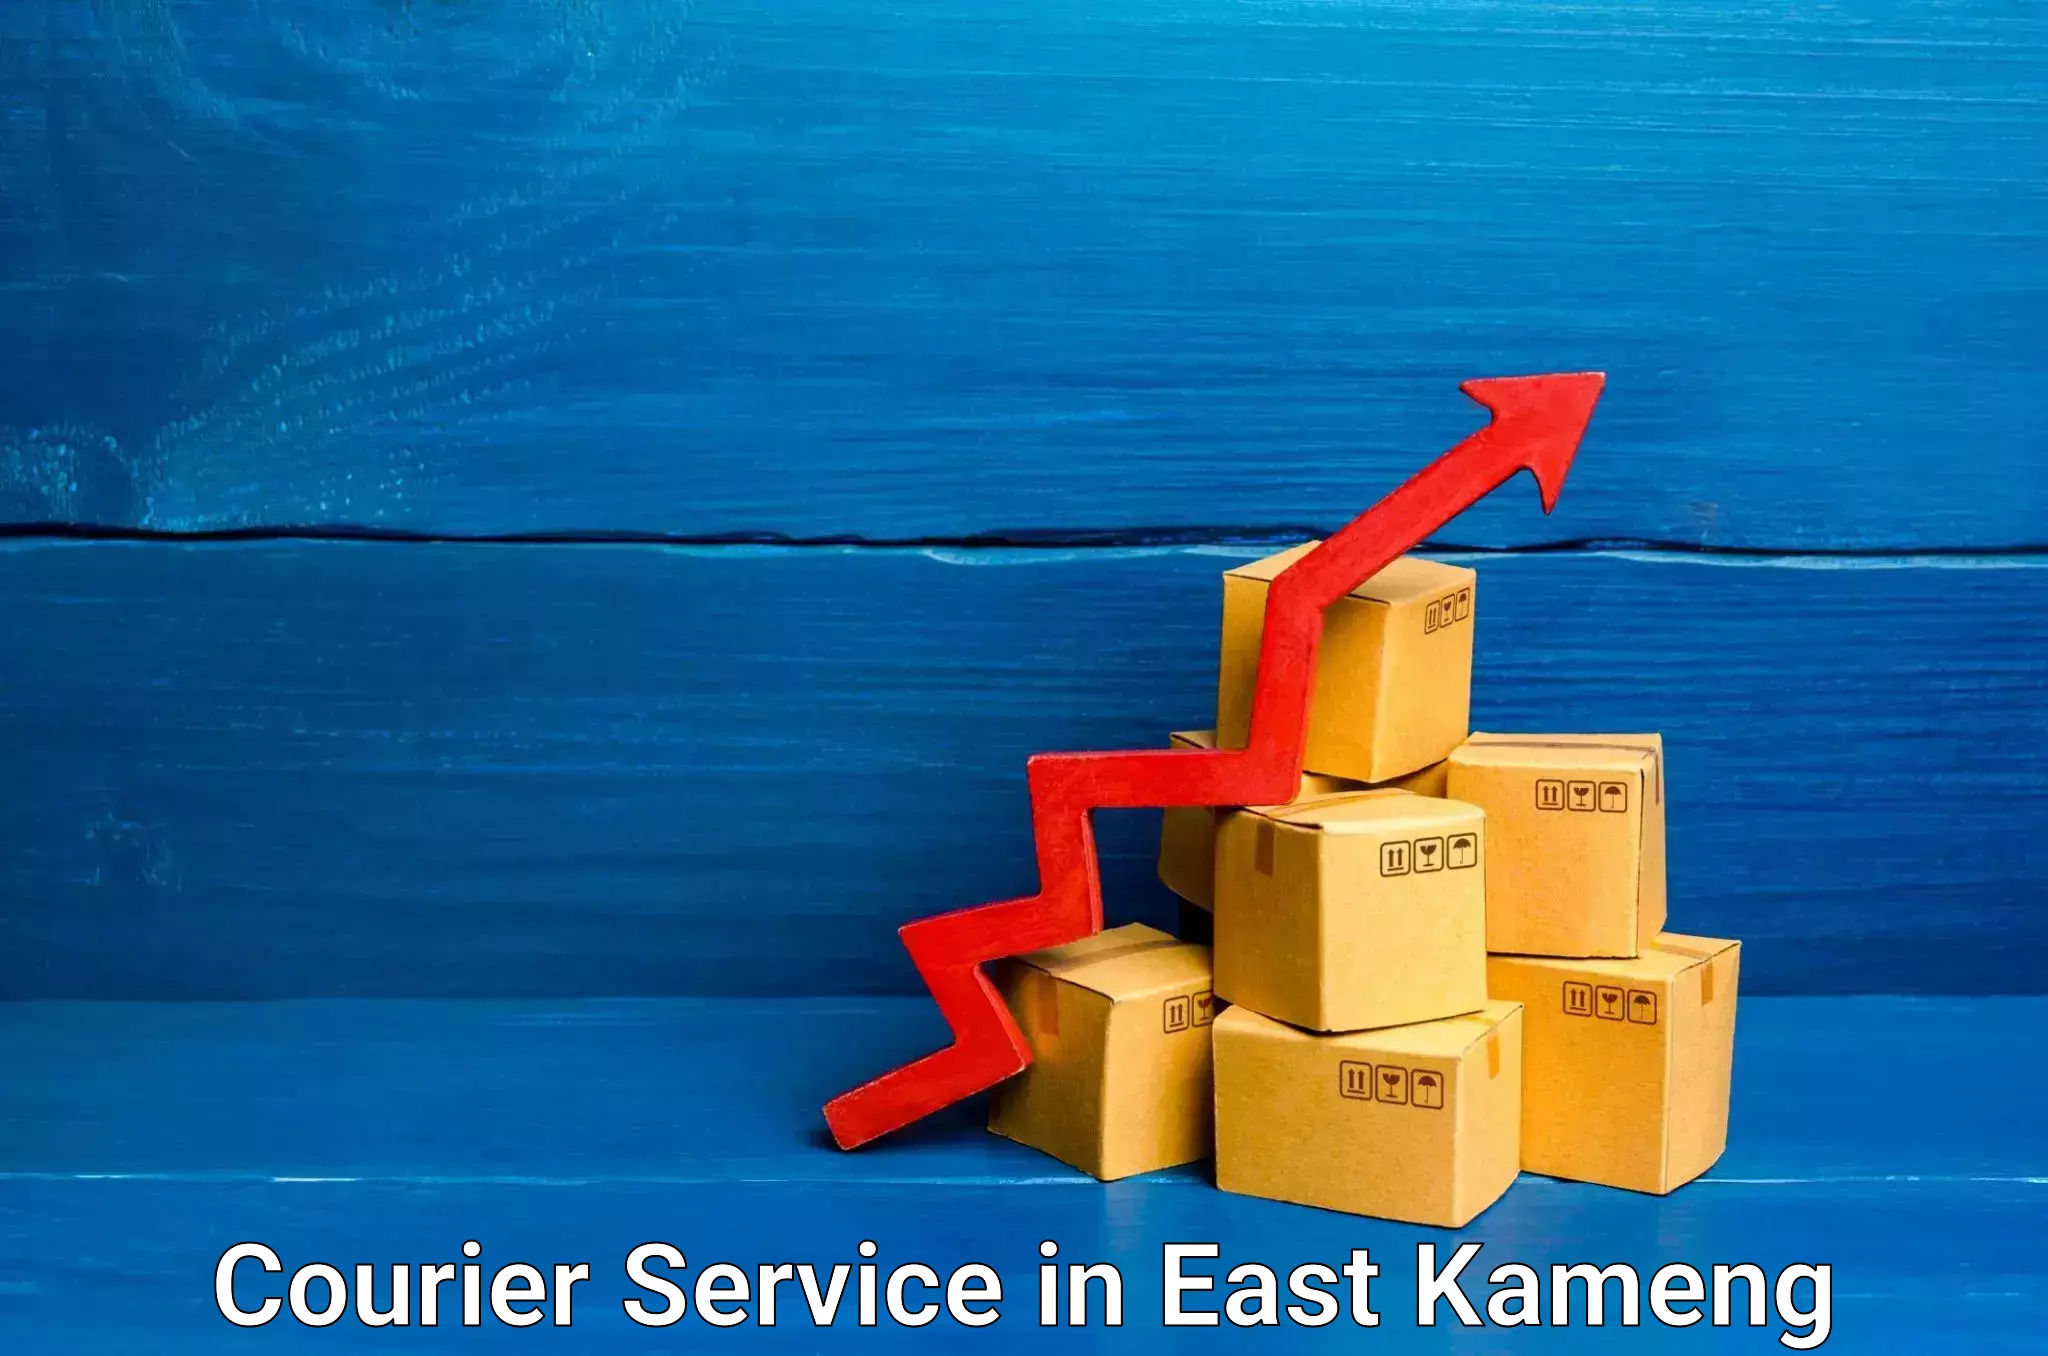 Comprehensive shipping services in East Kameng